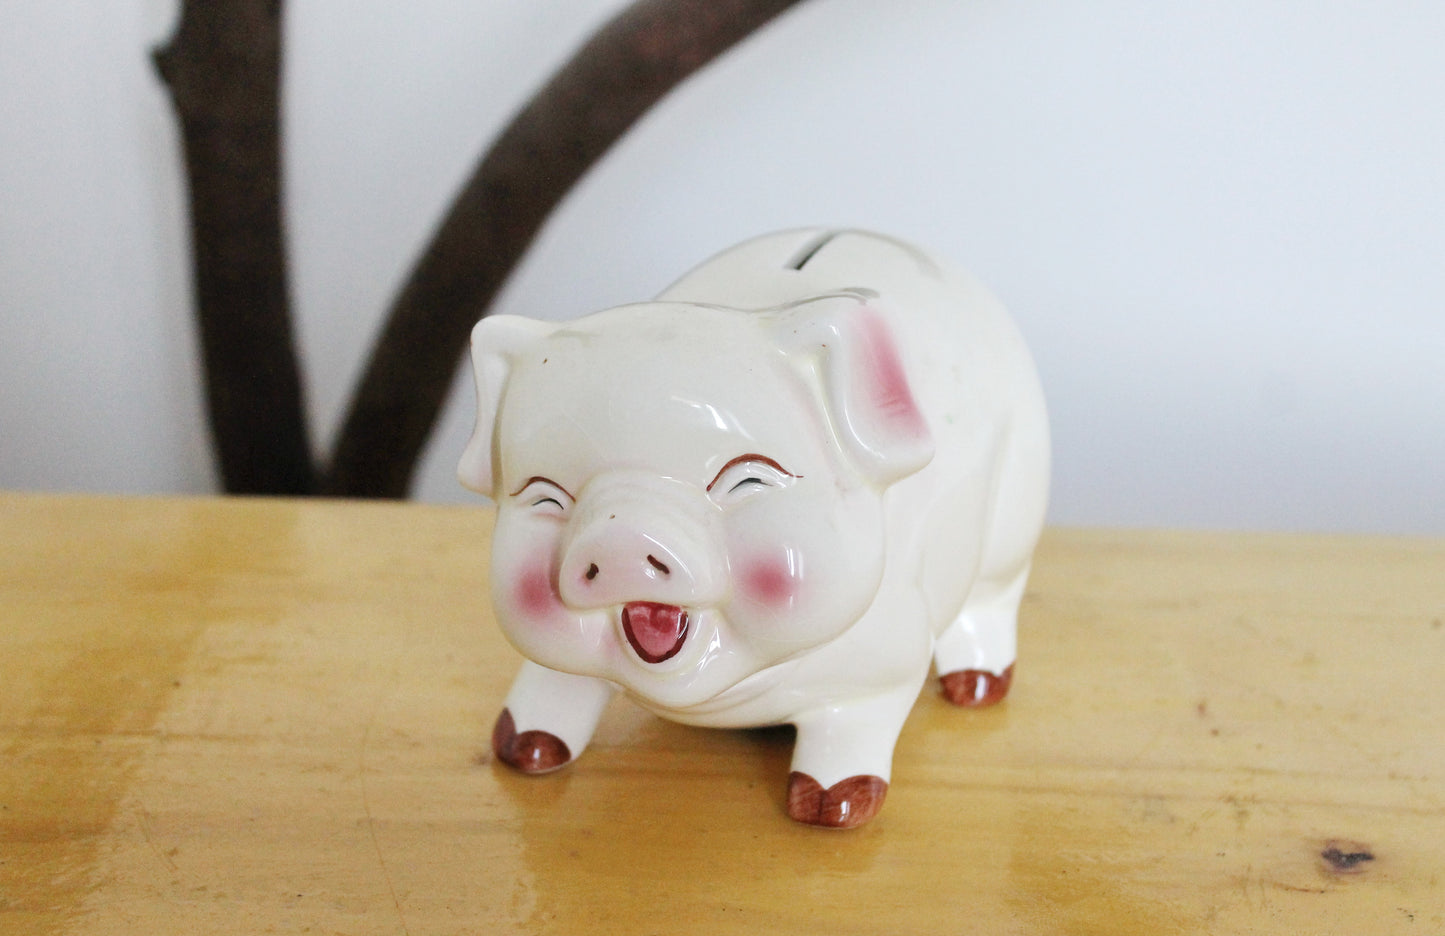 Porcelain pink Piggy Bank 5.9 inches - Vintage Piggy Bank - Home decor - Made in Germany - 1990-2000s